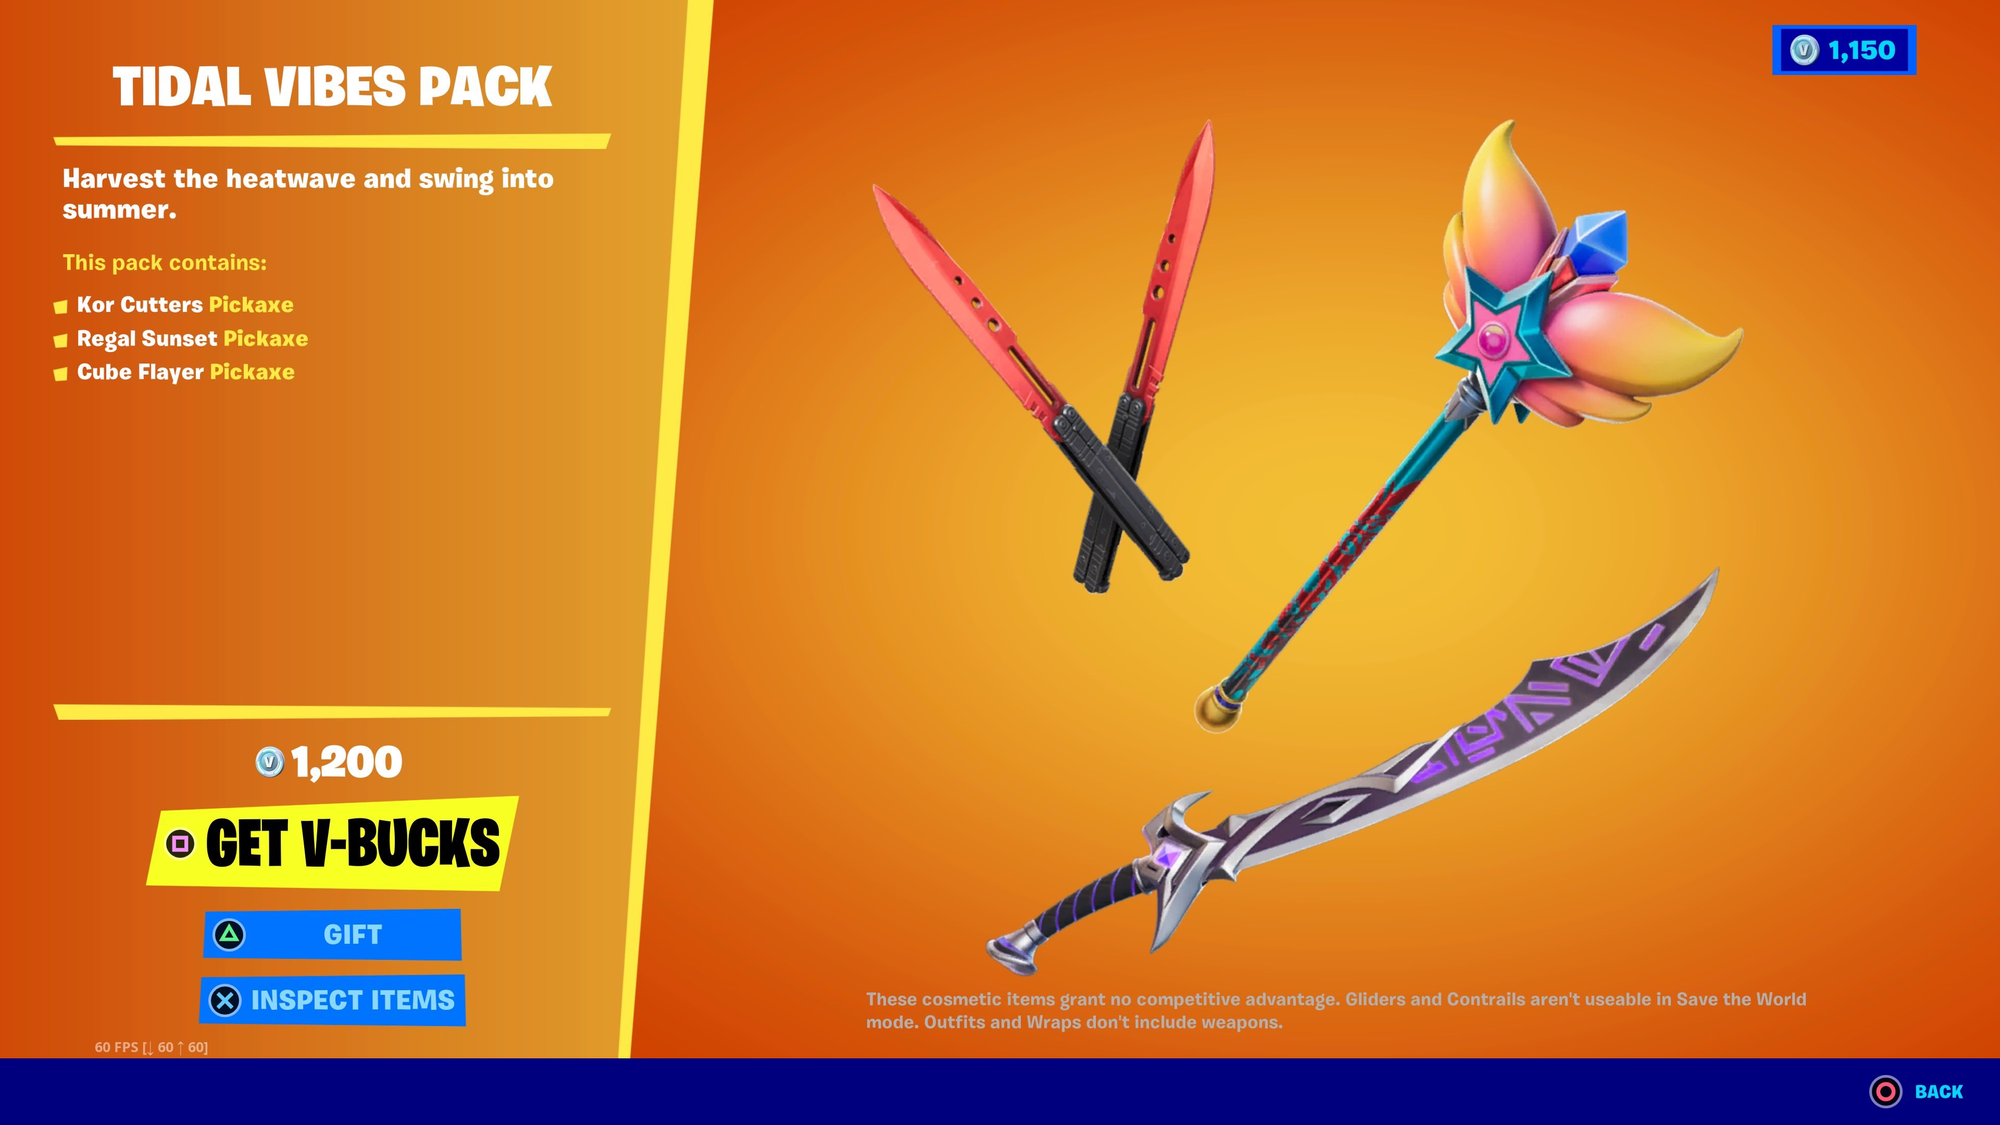 New Boardwalk Warriors Pack Available Now